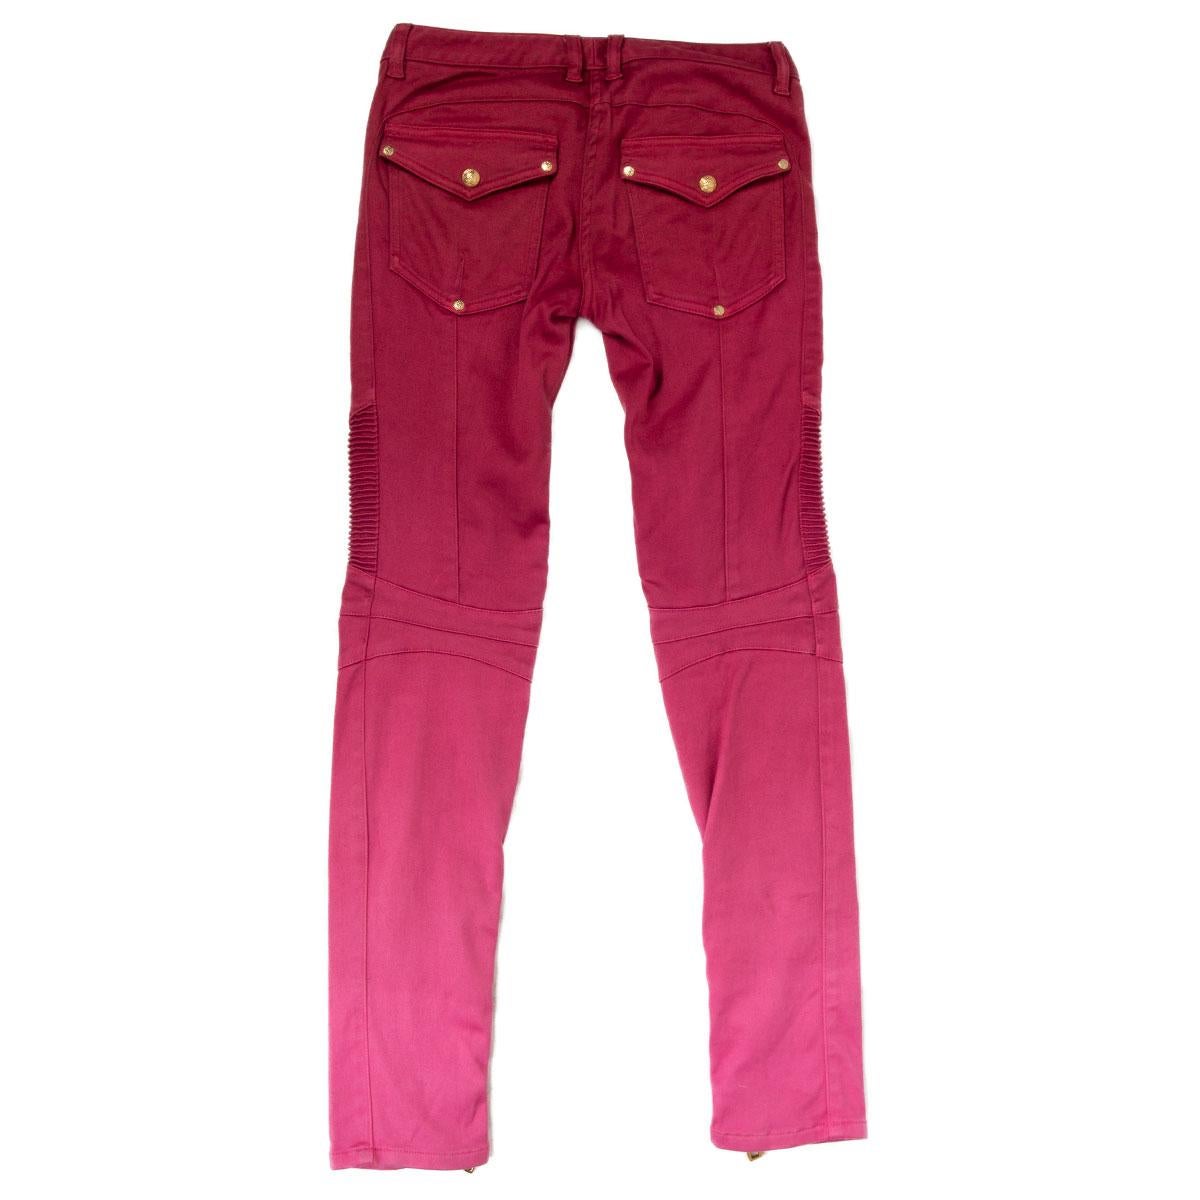 100% authentic Balmain gradient biker pants in pink to dark pink cotton (98%) and elastane (2%) with gold-tone zipper at the bottom-hem and two gold-tone buttoned- flap pockets on the back. Closes with one gold-tone button and a concealed zipper on